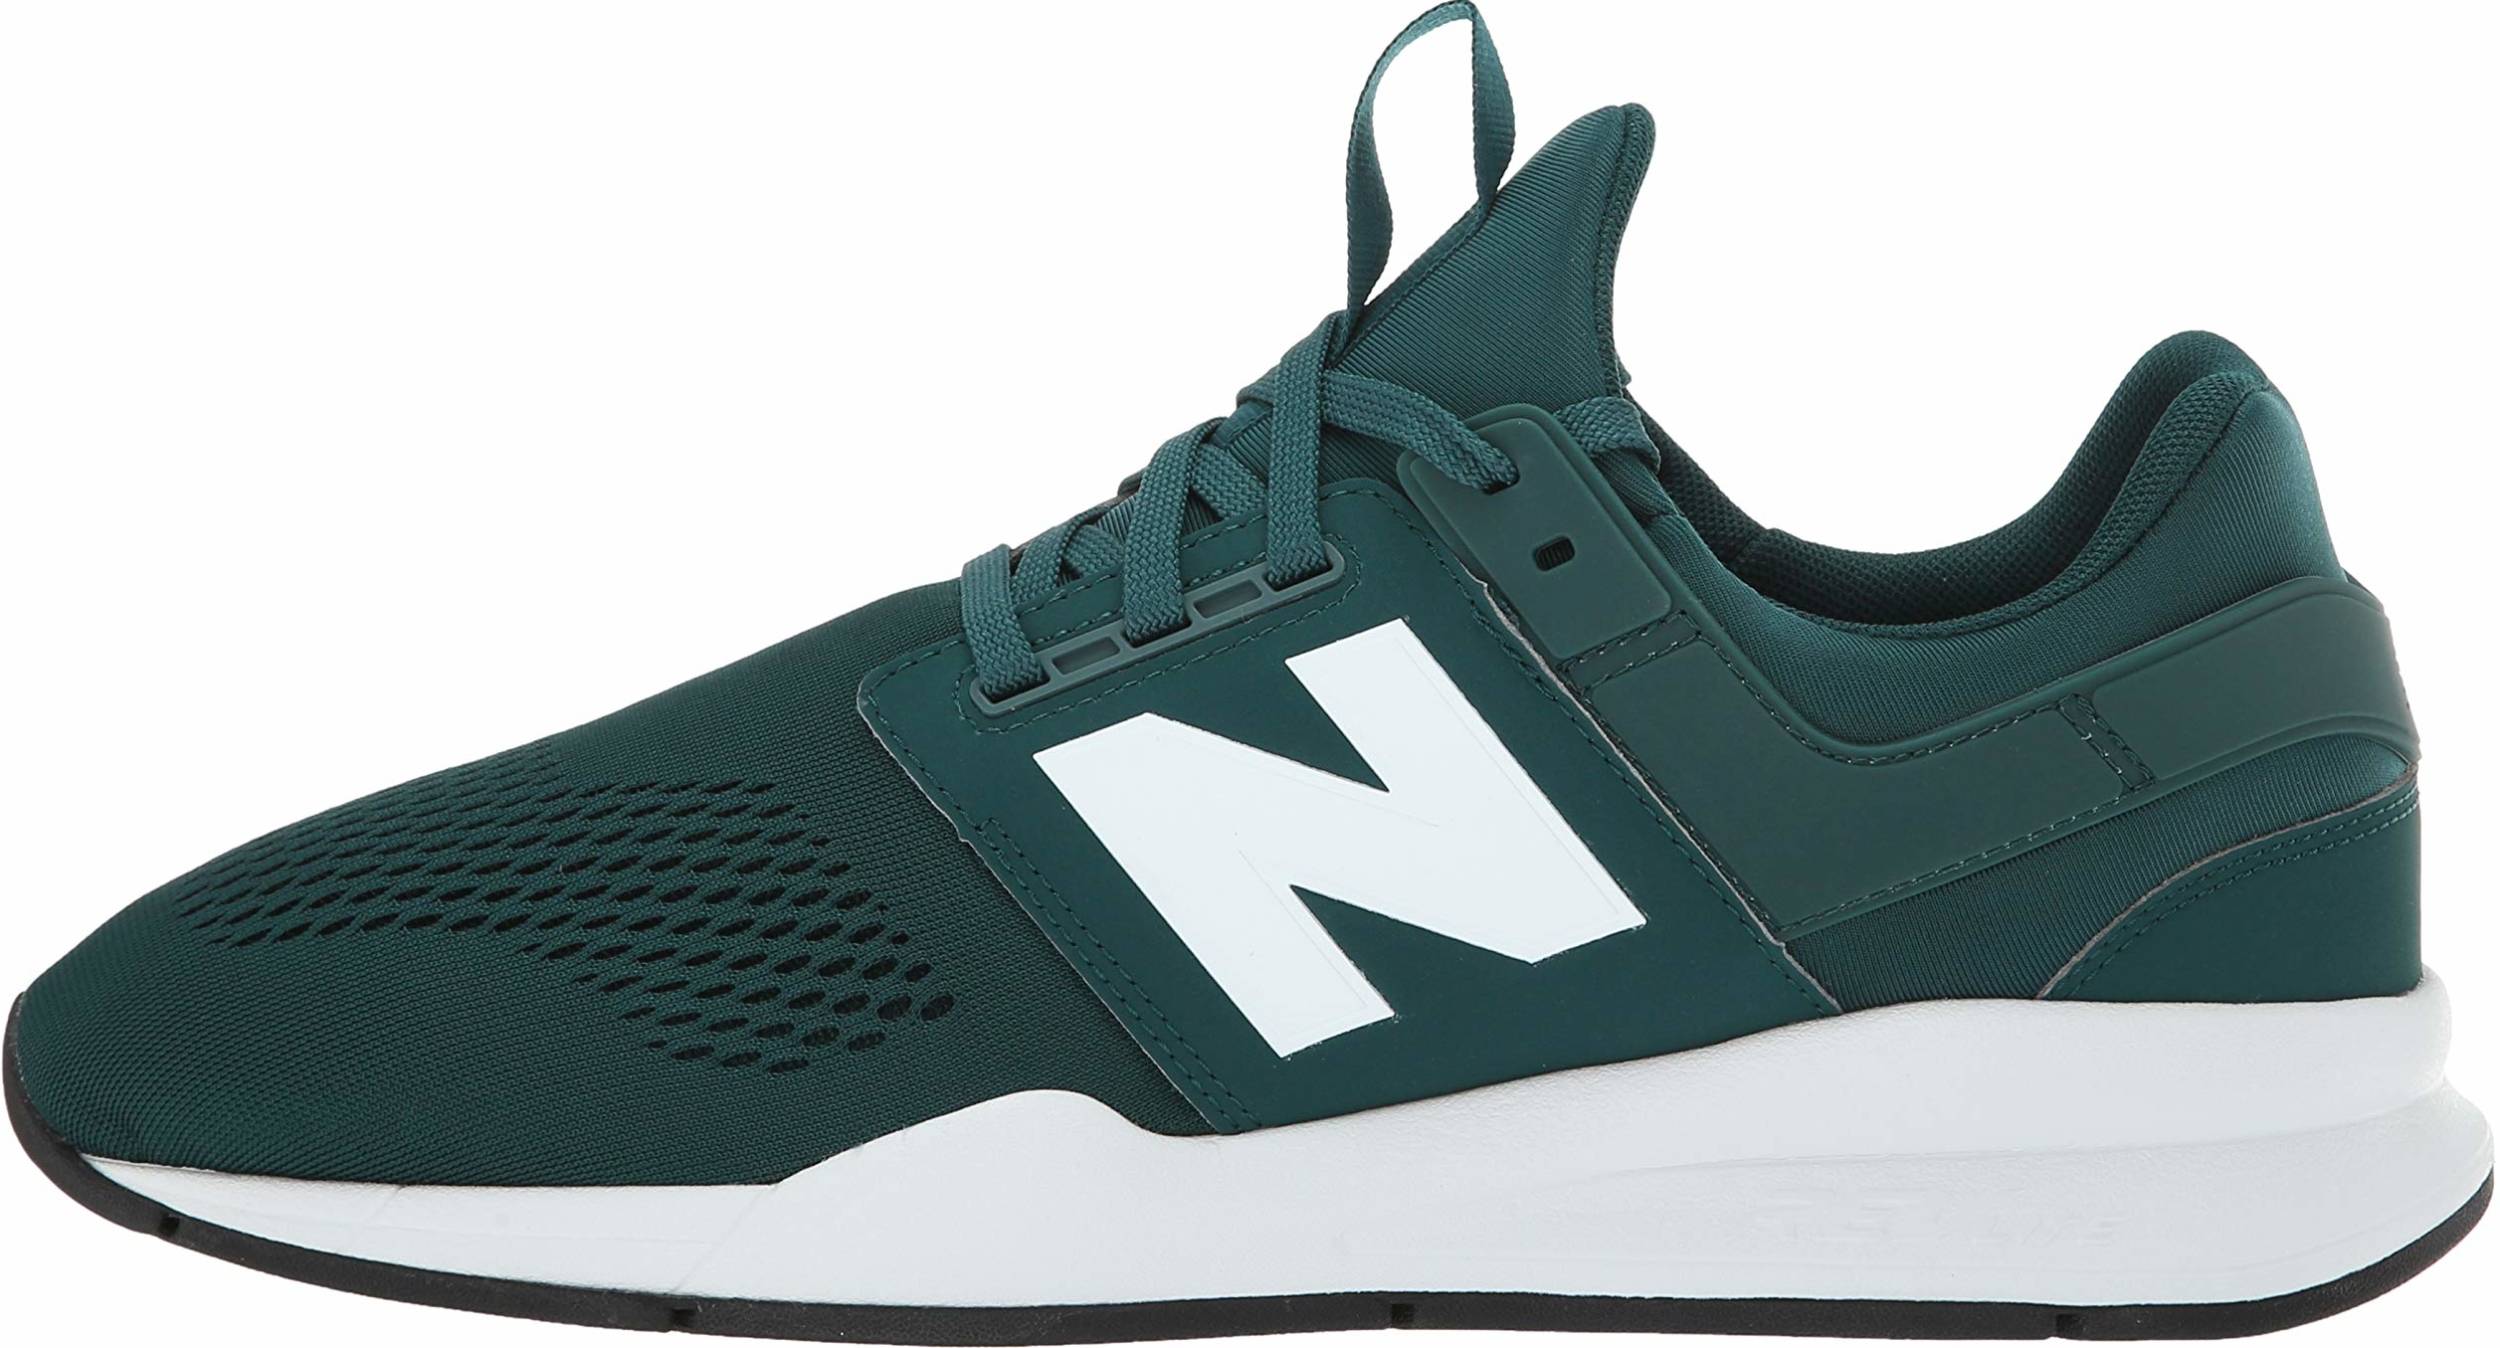 New Balance 247 v2 sneakers in 10 colors (only $39) | RunRepeat